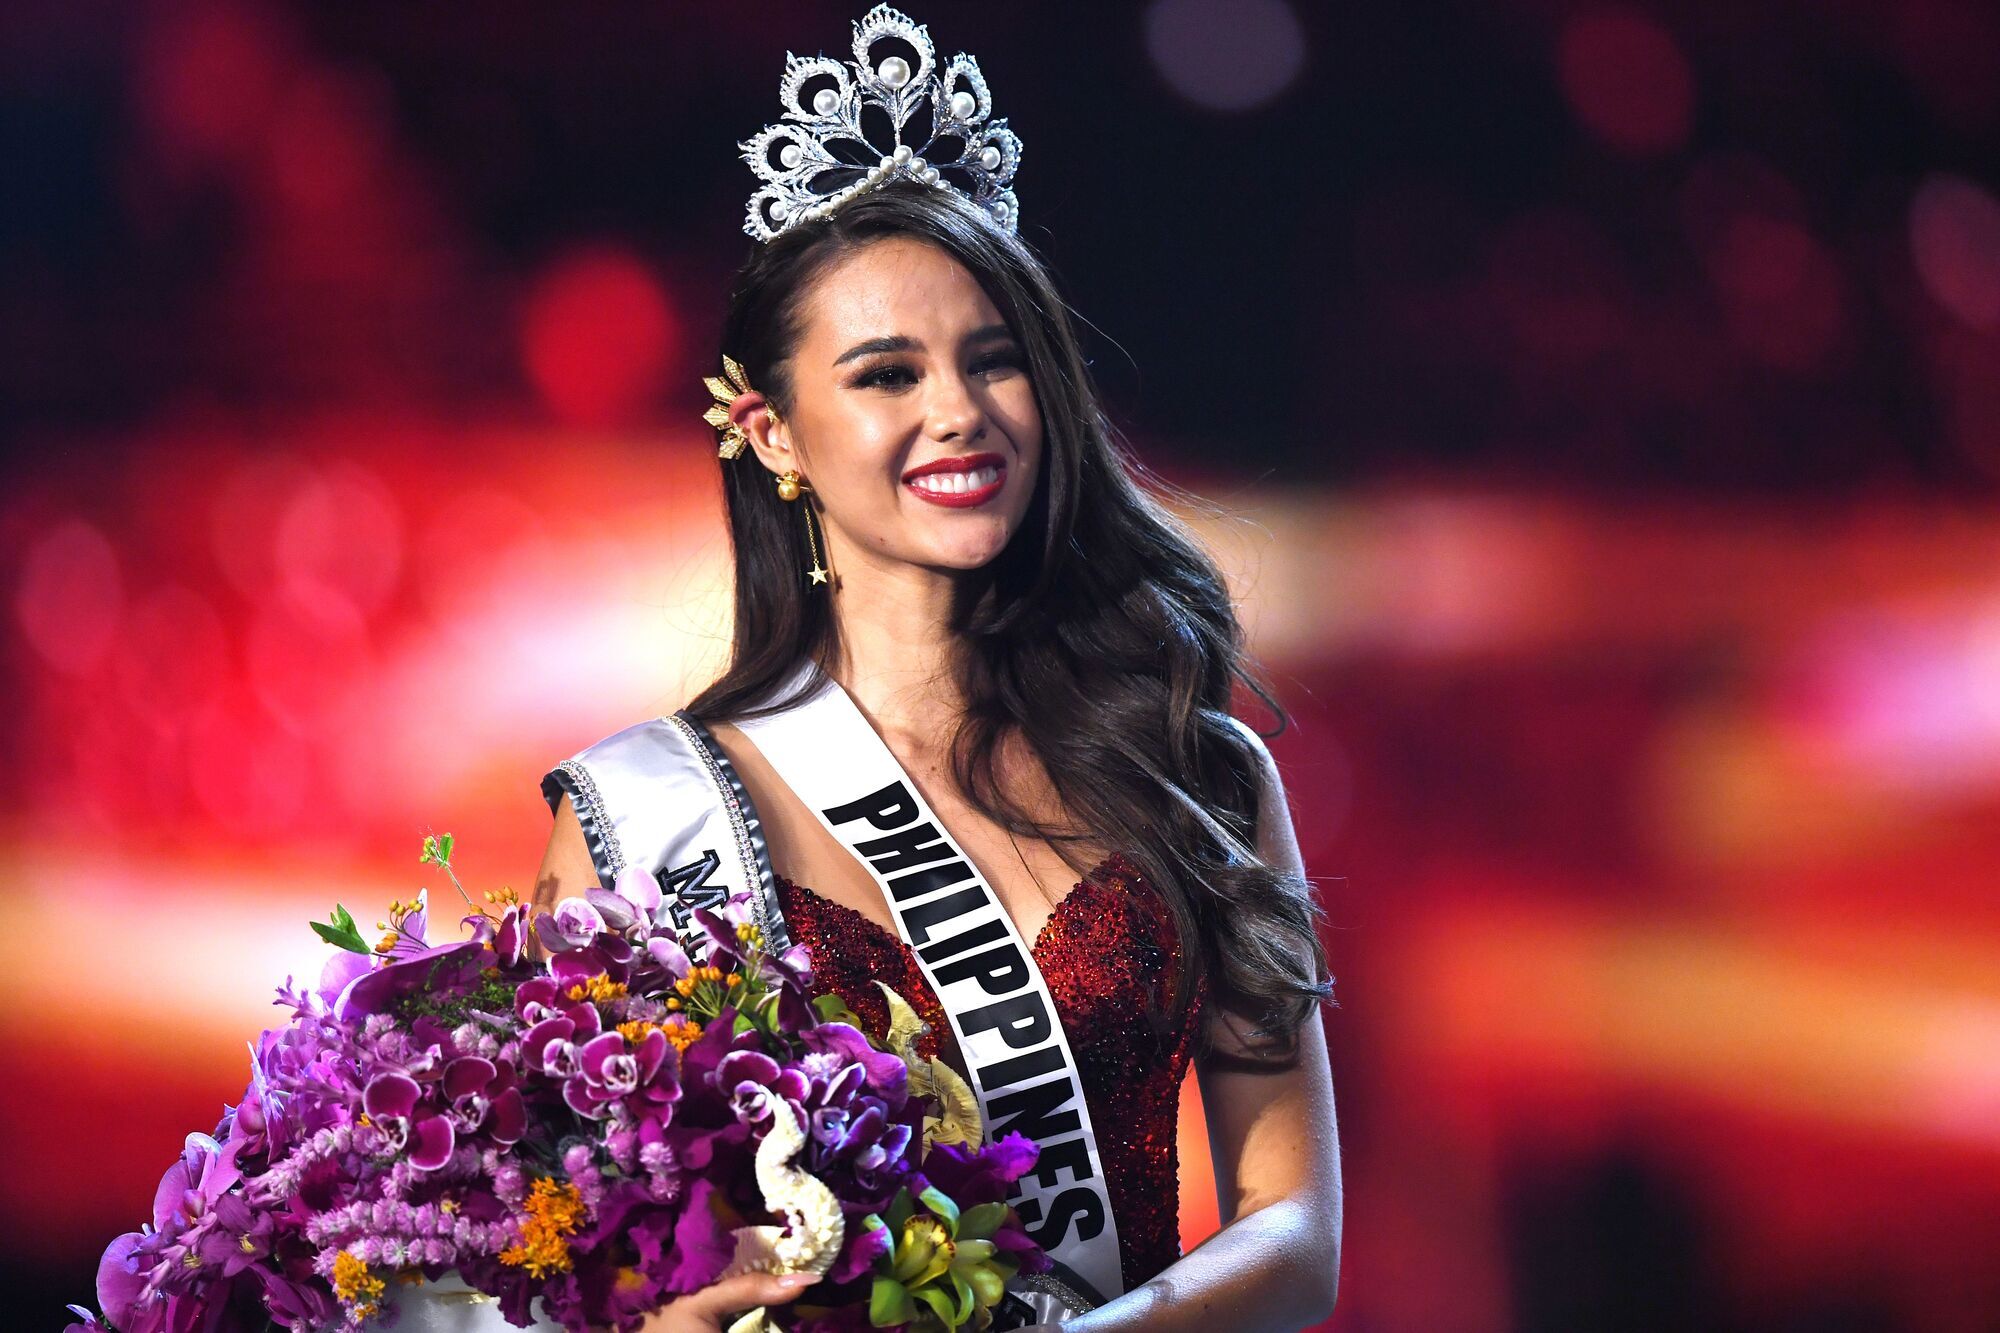 7 women who became famous after participating in the Miss Universe pageant: from actresses to TV presenters